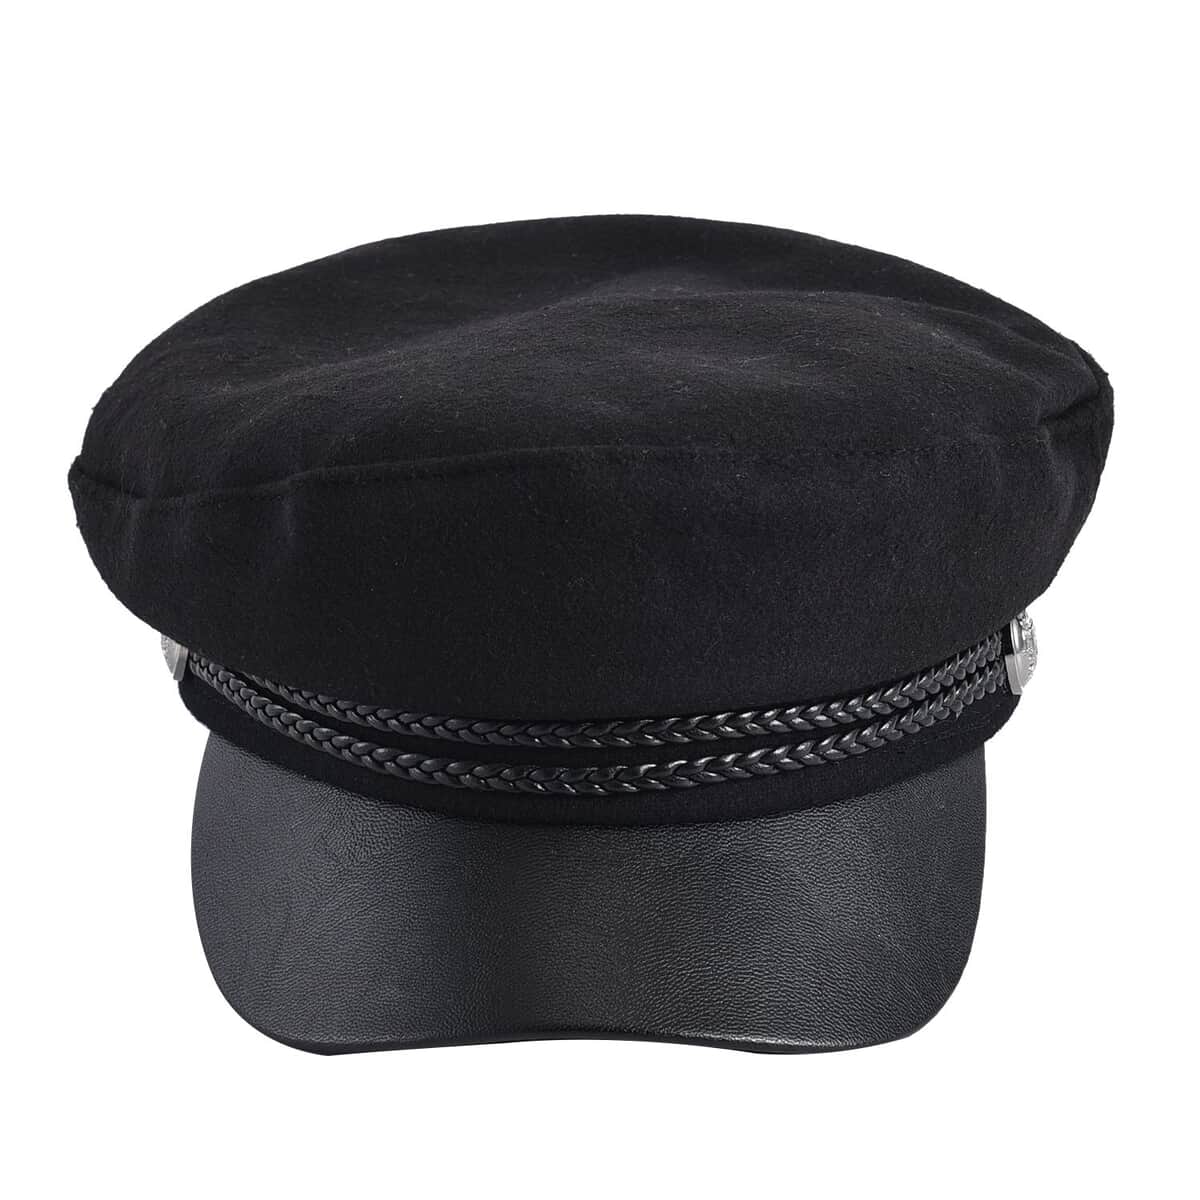 Black Fiddler Cap - (Diameter 22-23 Inches and Height -2.75 Inches) image number 0